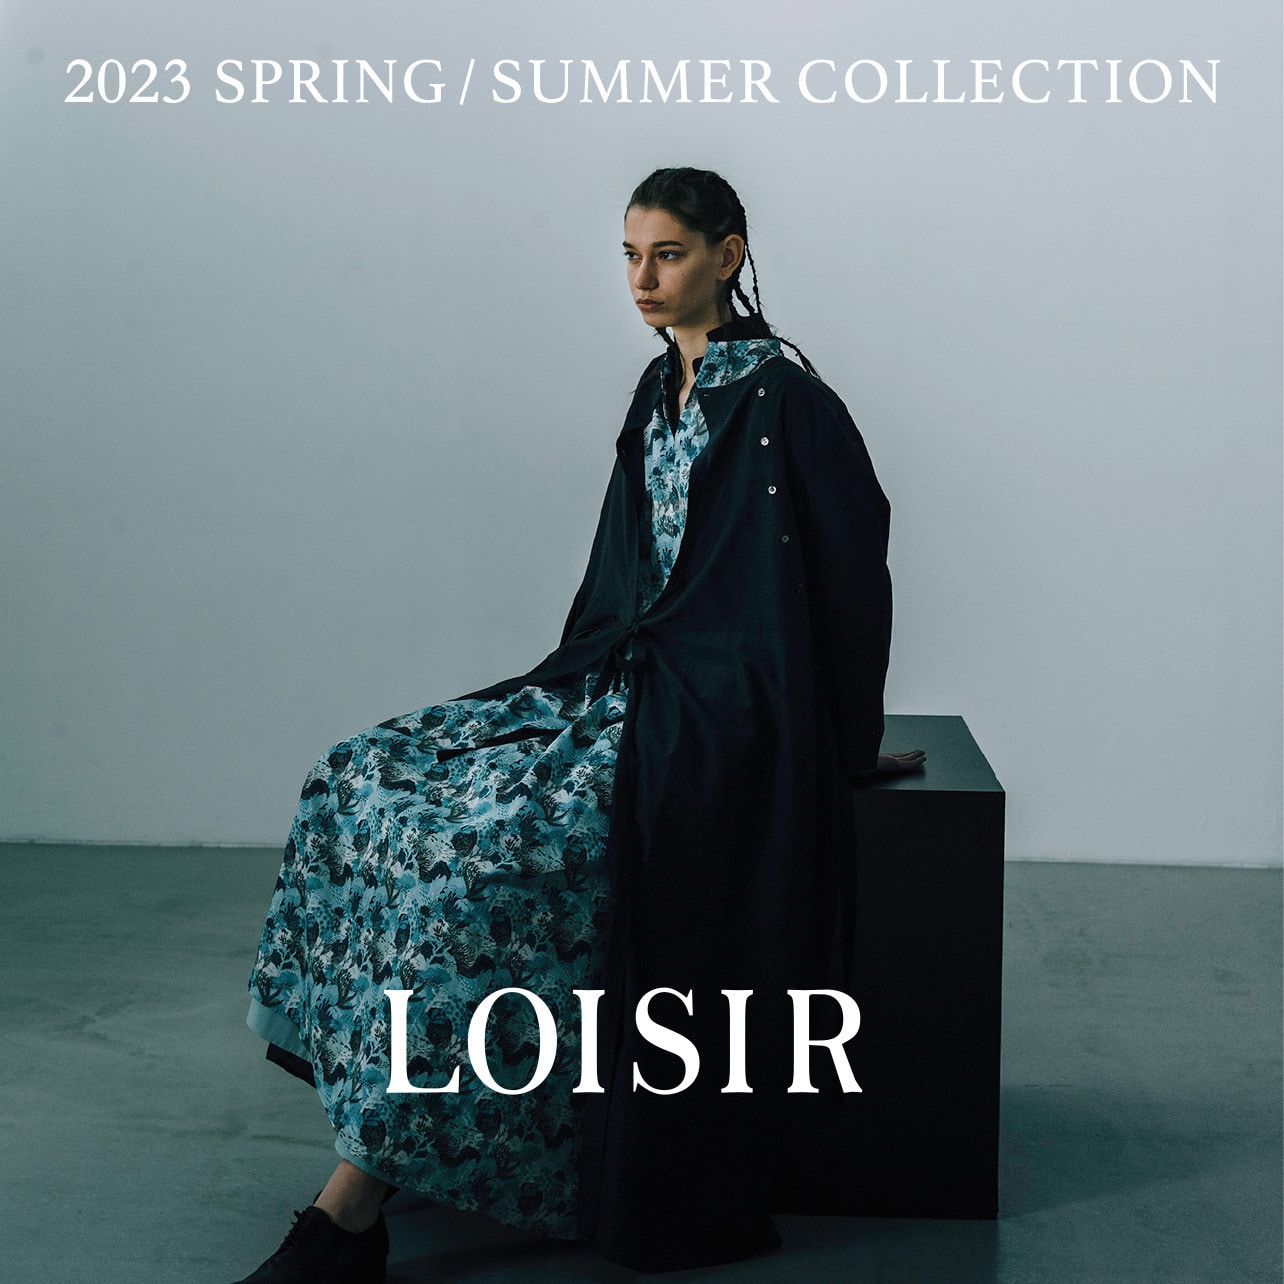 LOISIR 23SS collection